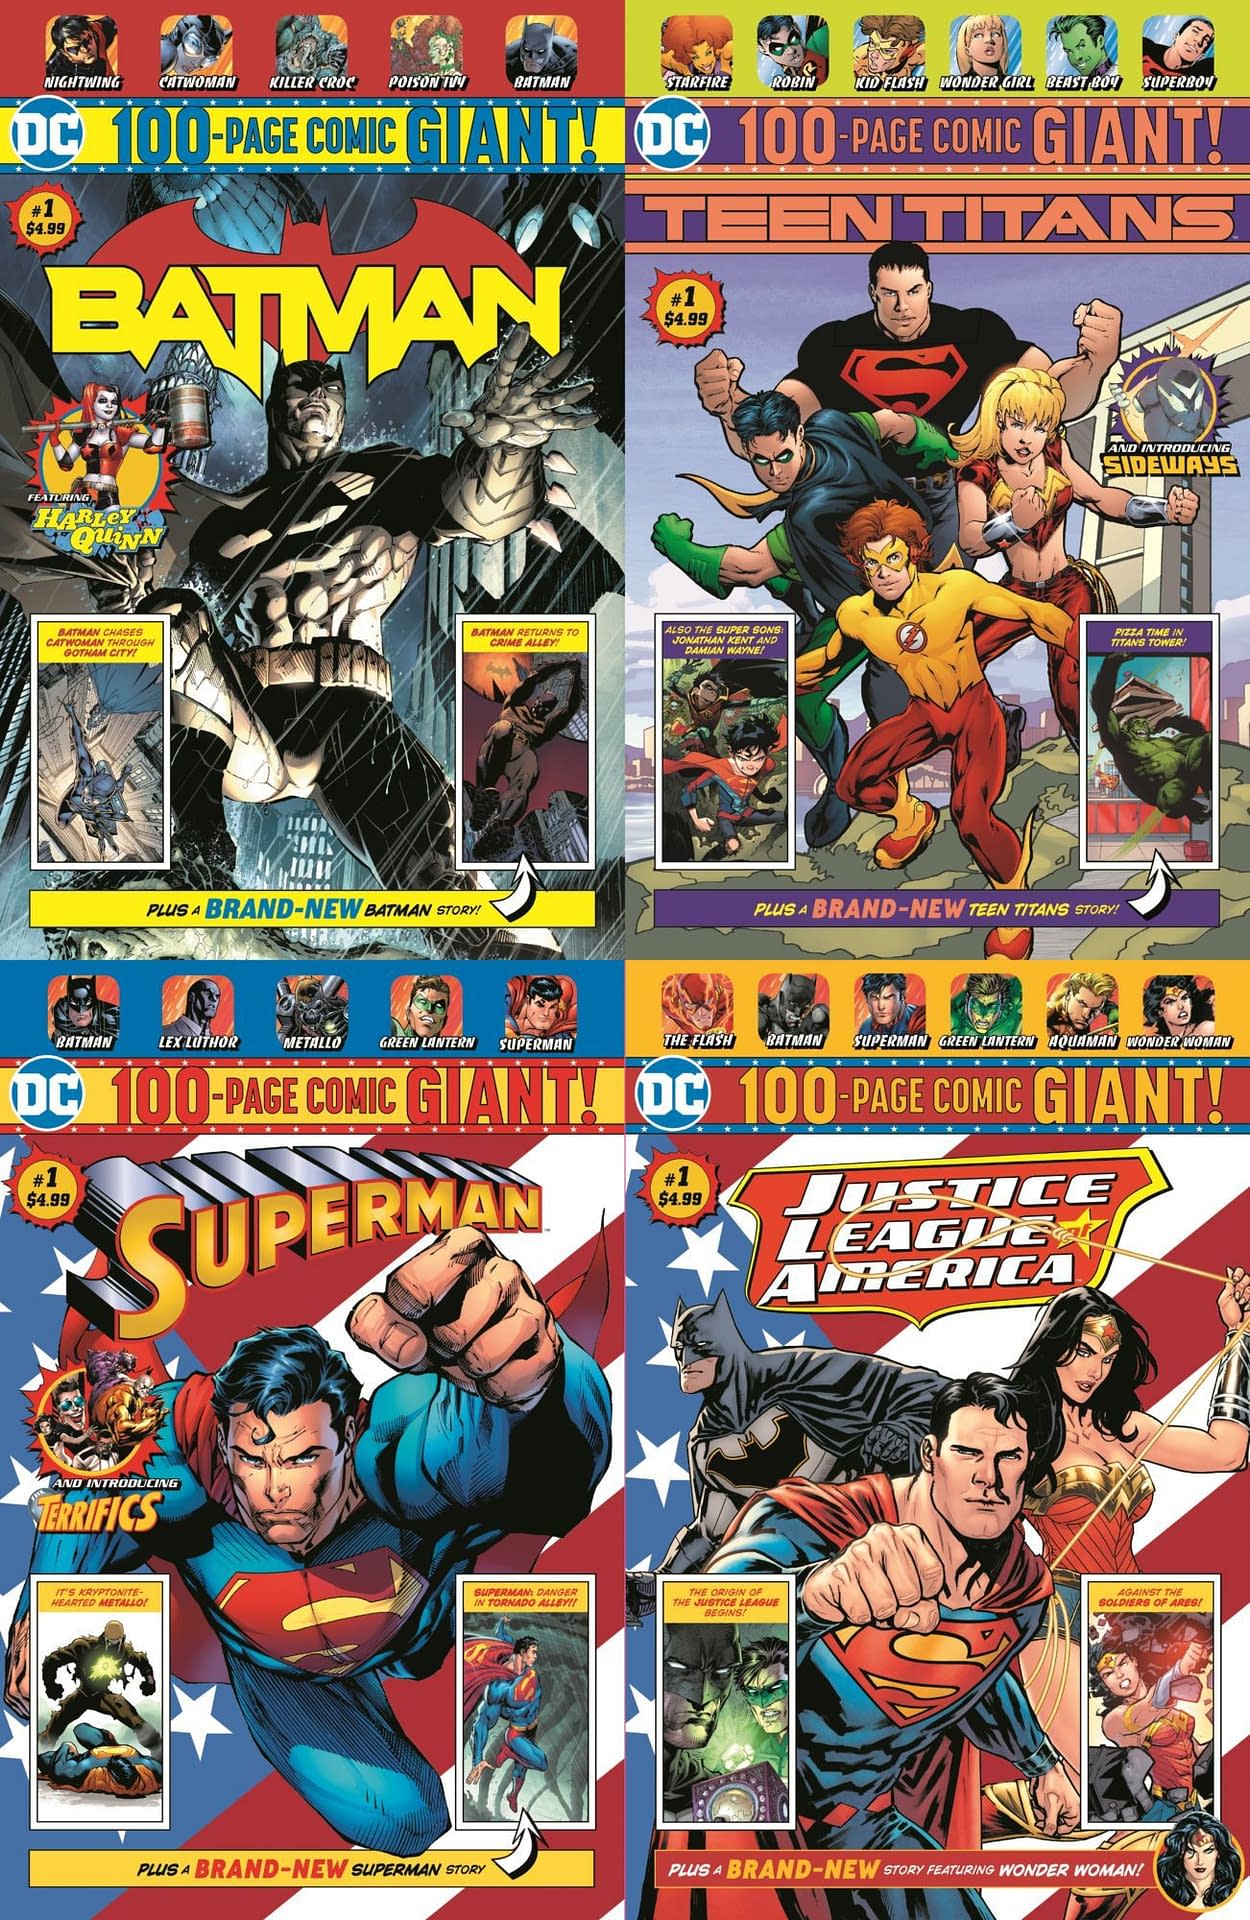 DC Replaces Walmart 100-Page Giants With Four-Packs of Comics.